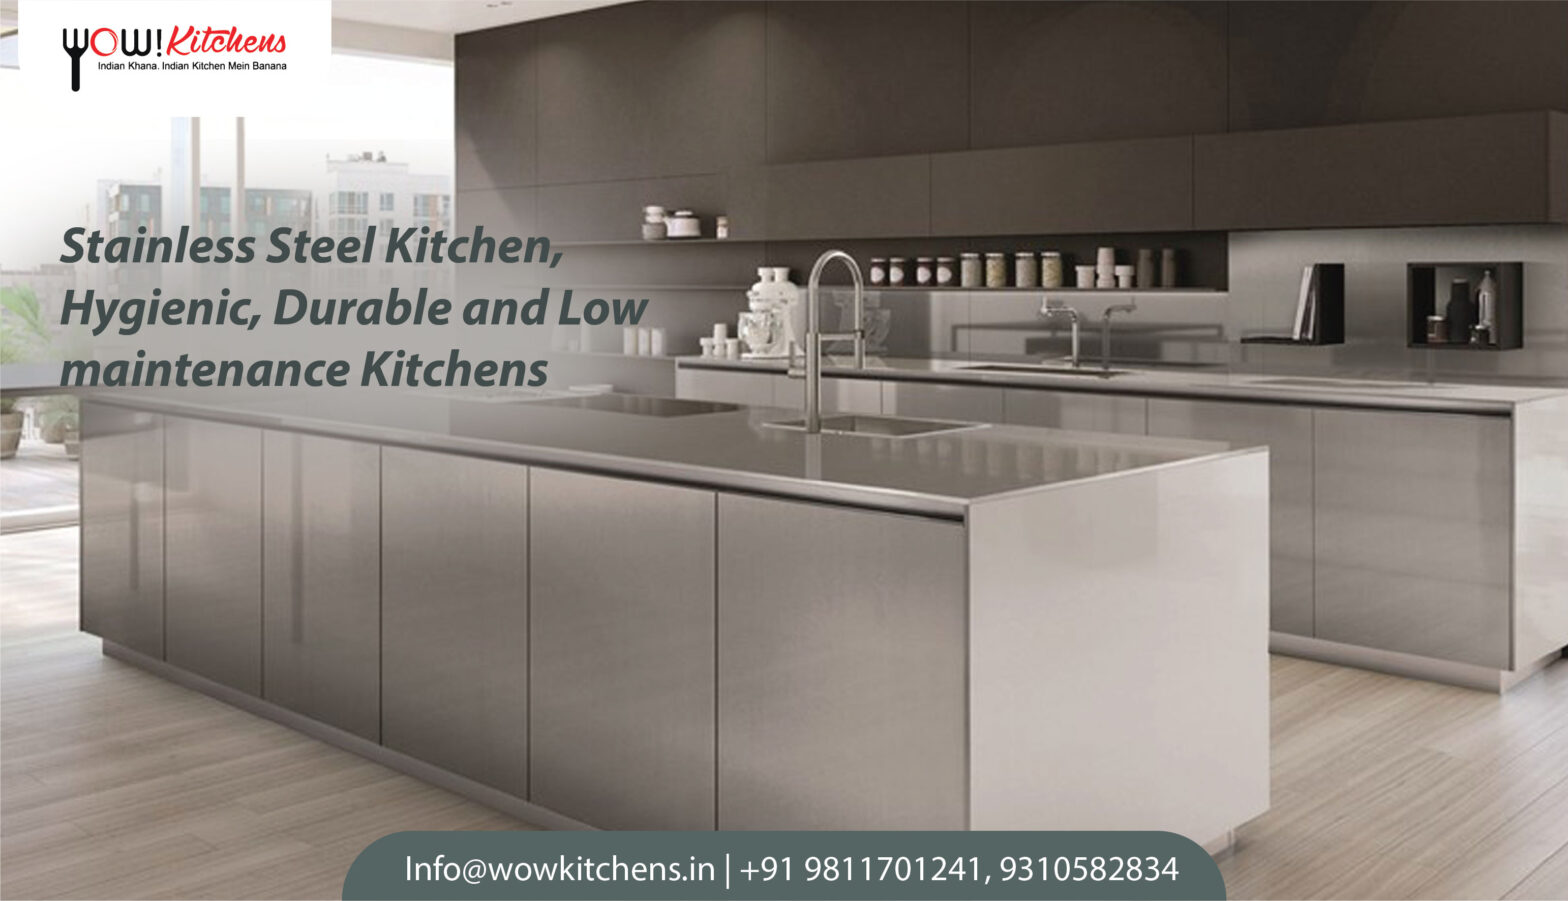 Stainless Steel Kitchens, Hygienic, Durable and Low Maintenance Kitchens